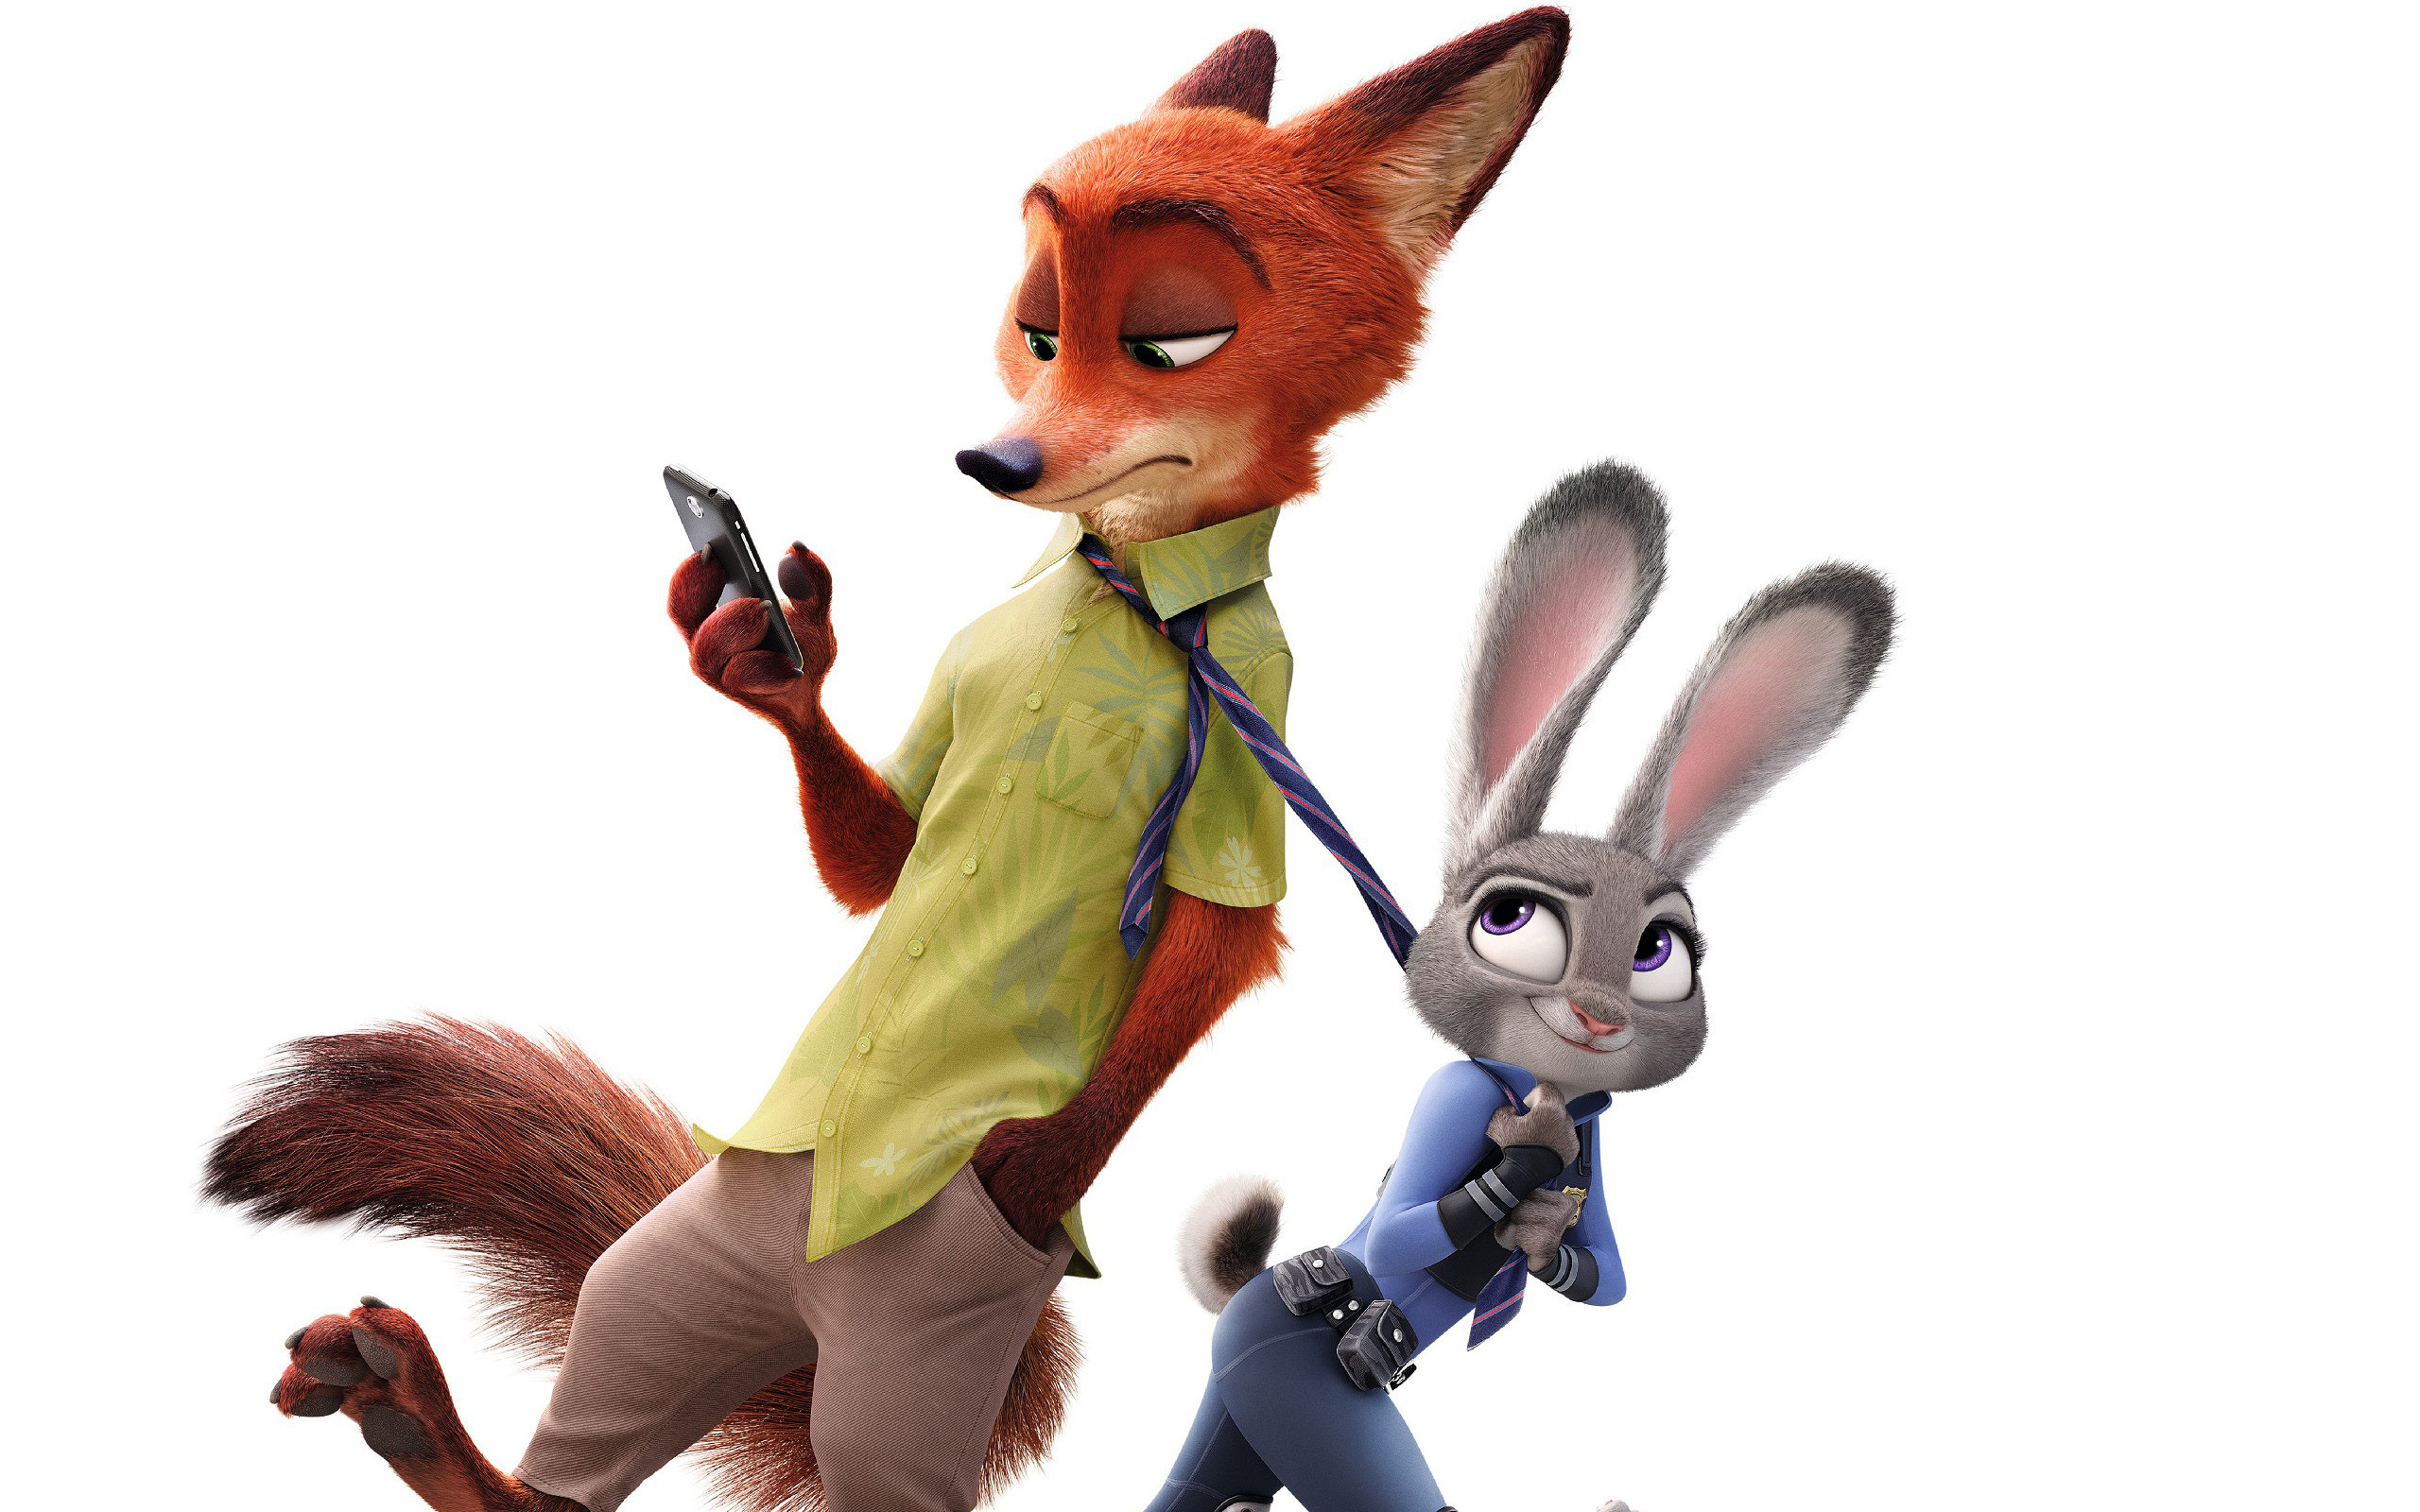 2560x1600 Zootopia Wallpapers - HD Wallpapers Backgrounds of Your Choice